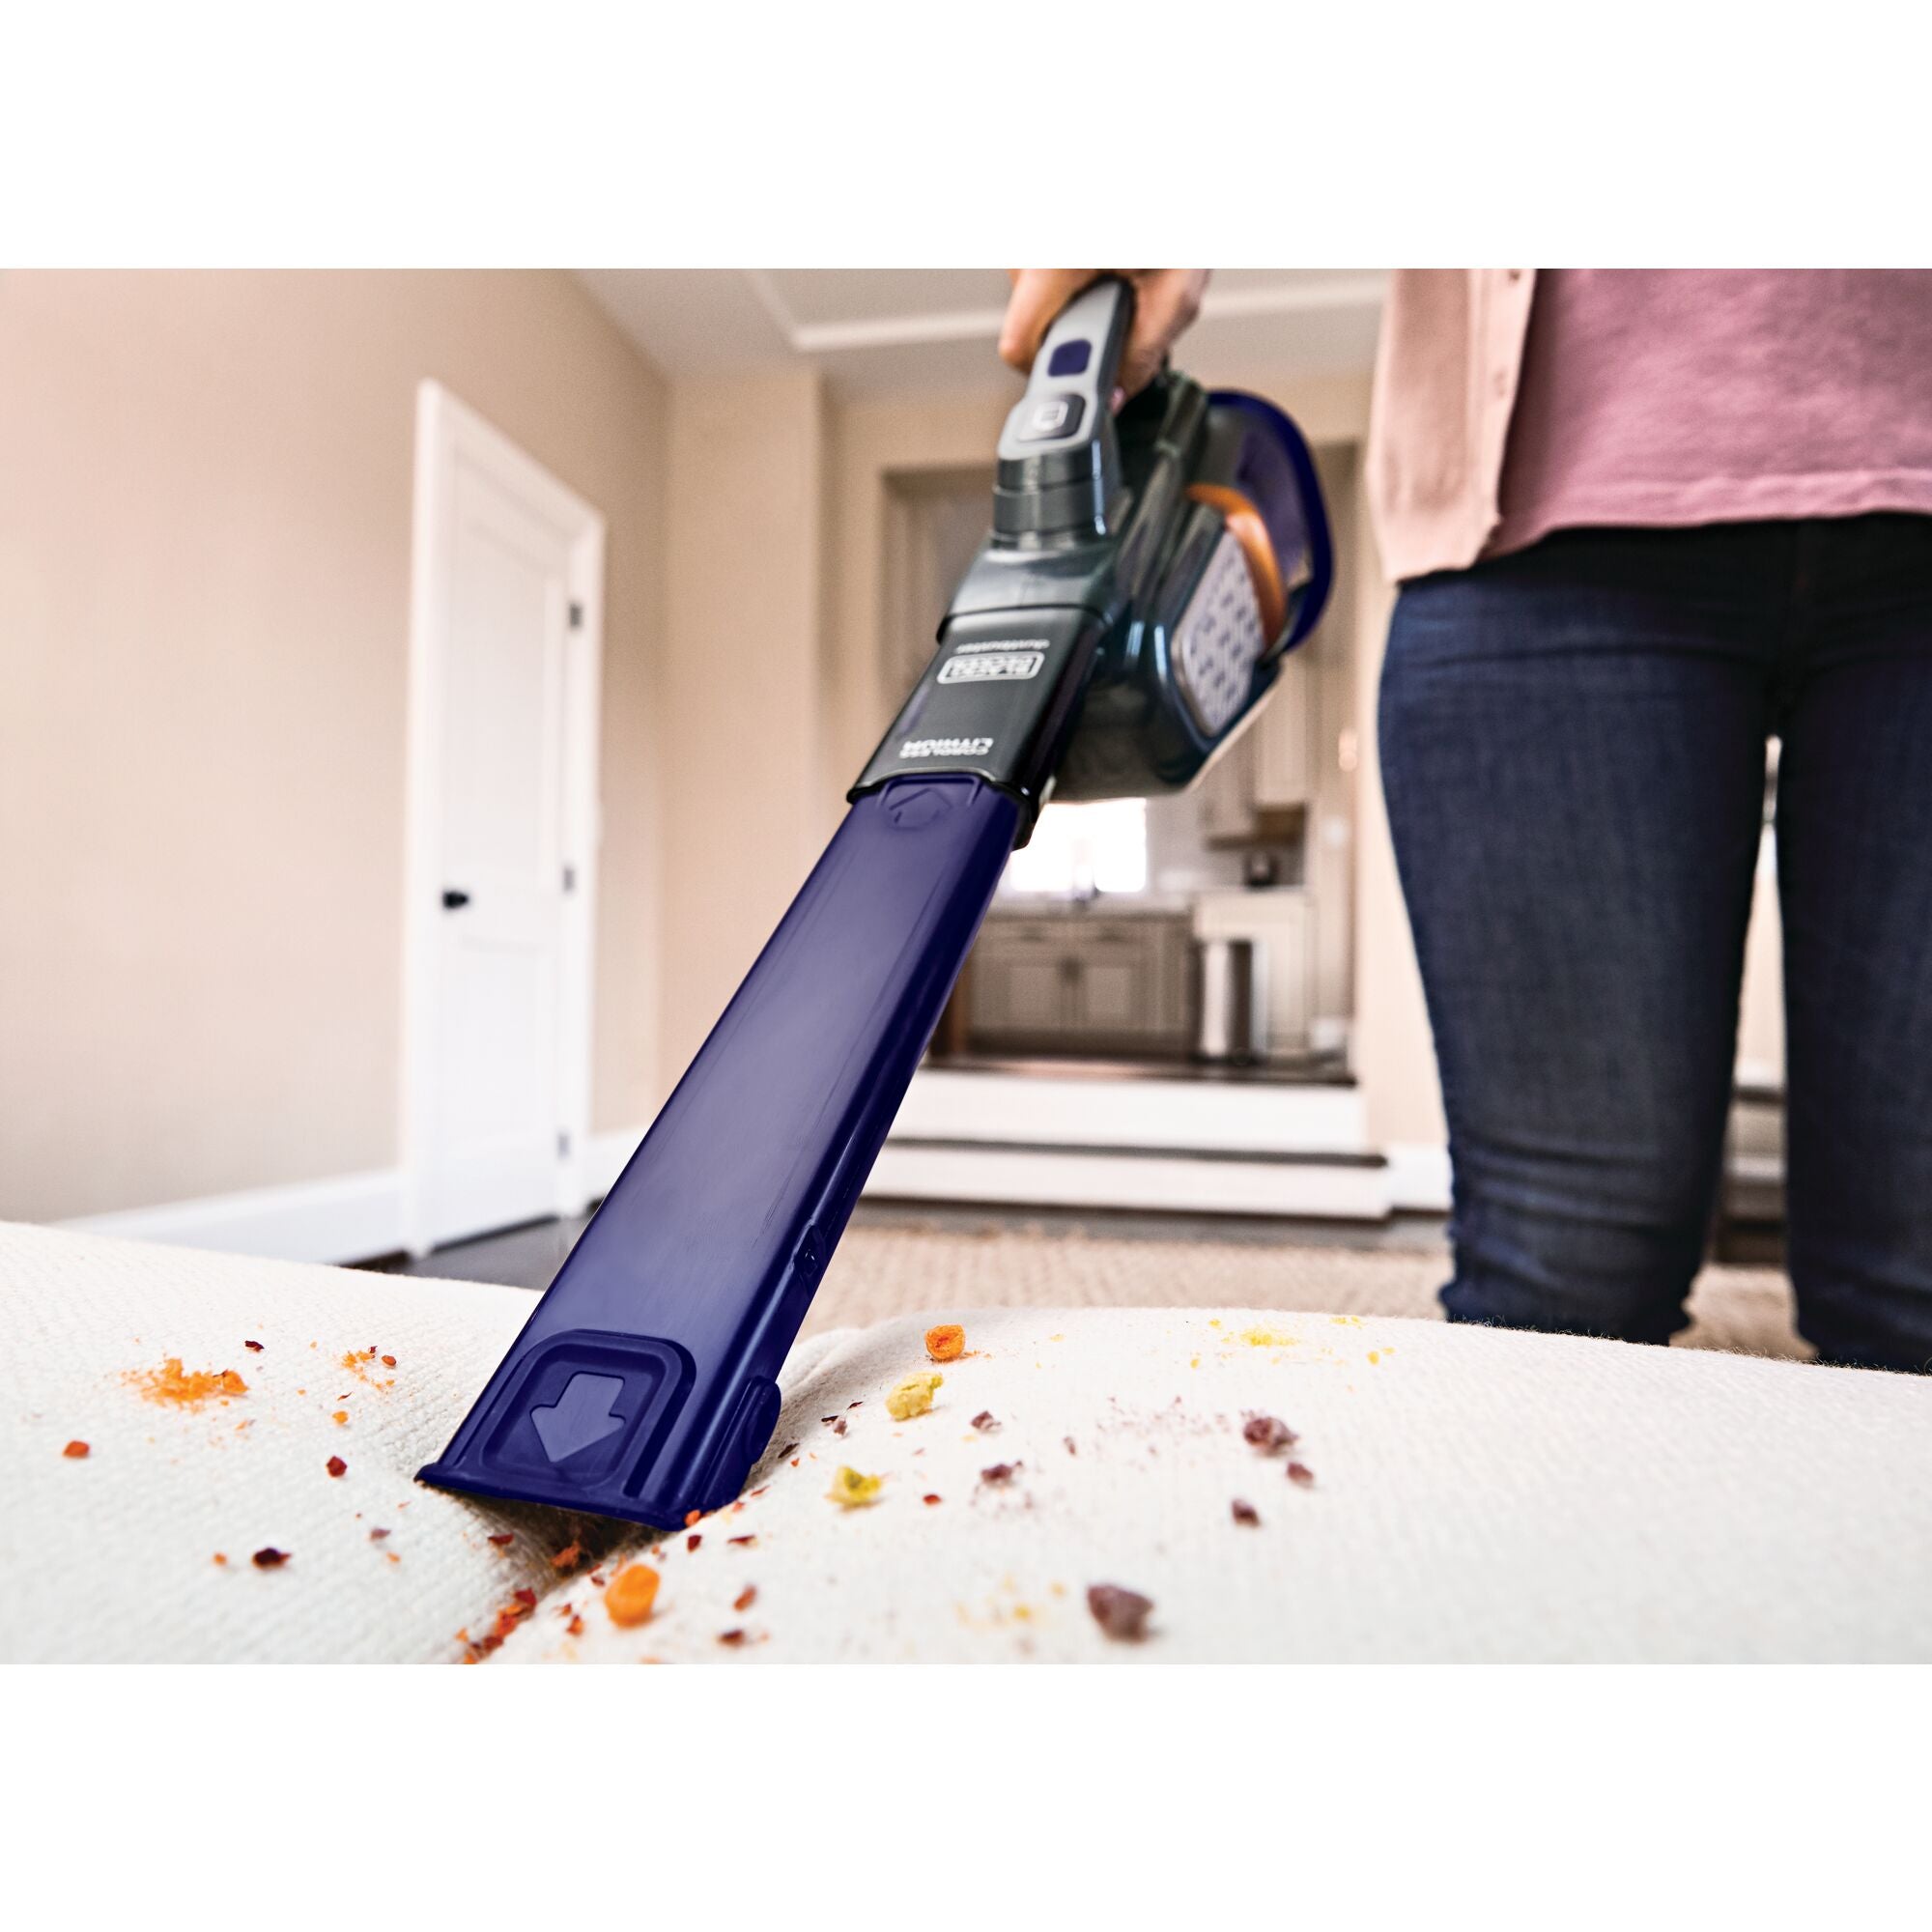 BLACK+DECKER dustbuster® furbuster™ Cordless Handheld Vacuum includes vacuum, built-in crevice tool, motorized pet brush, washable filter and prefilter and charger